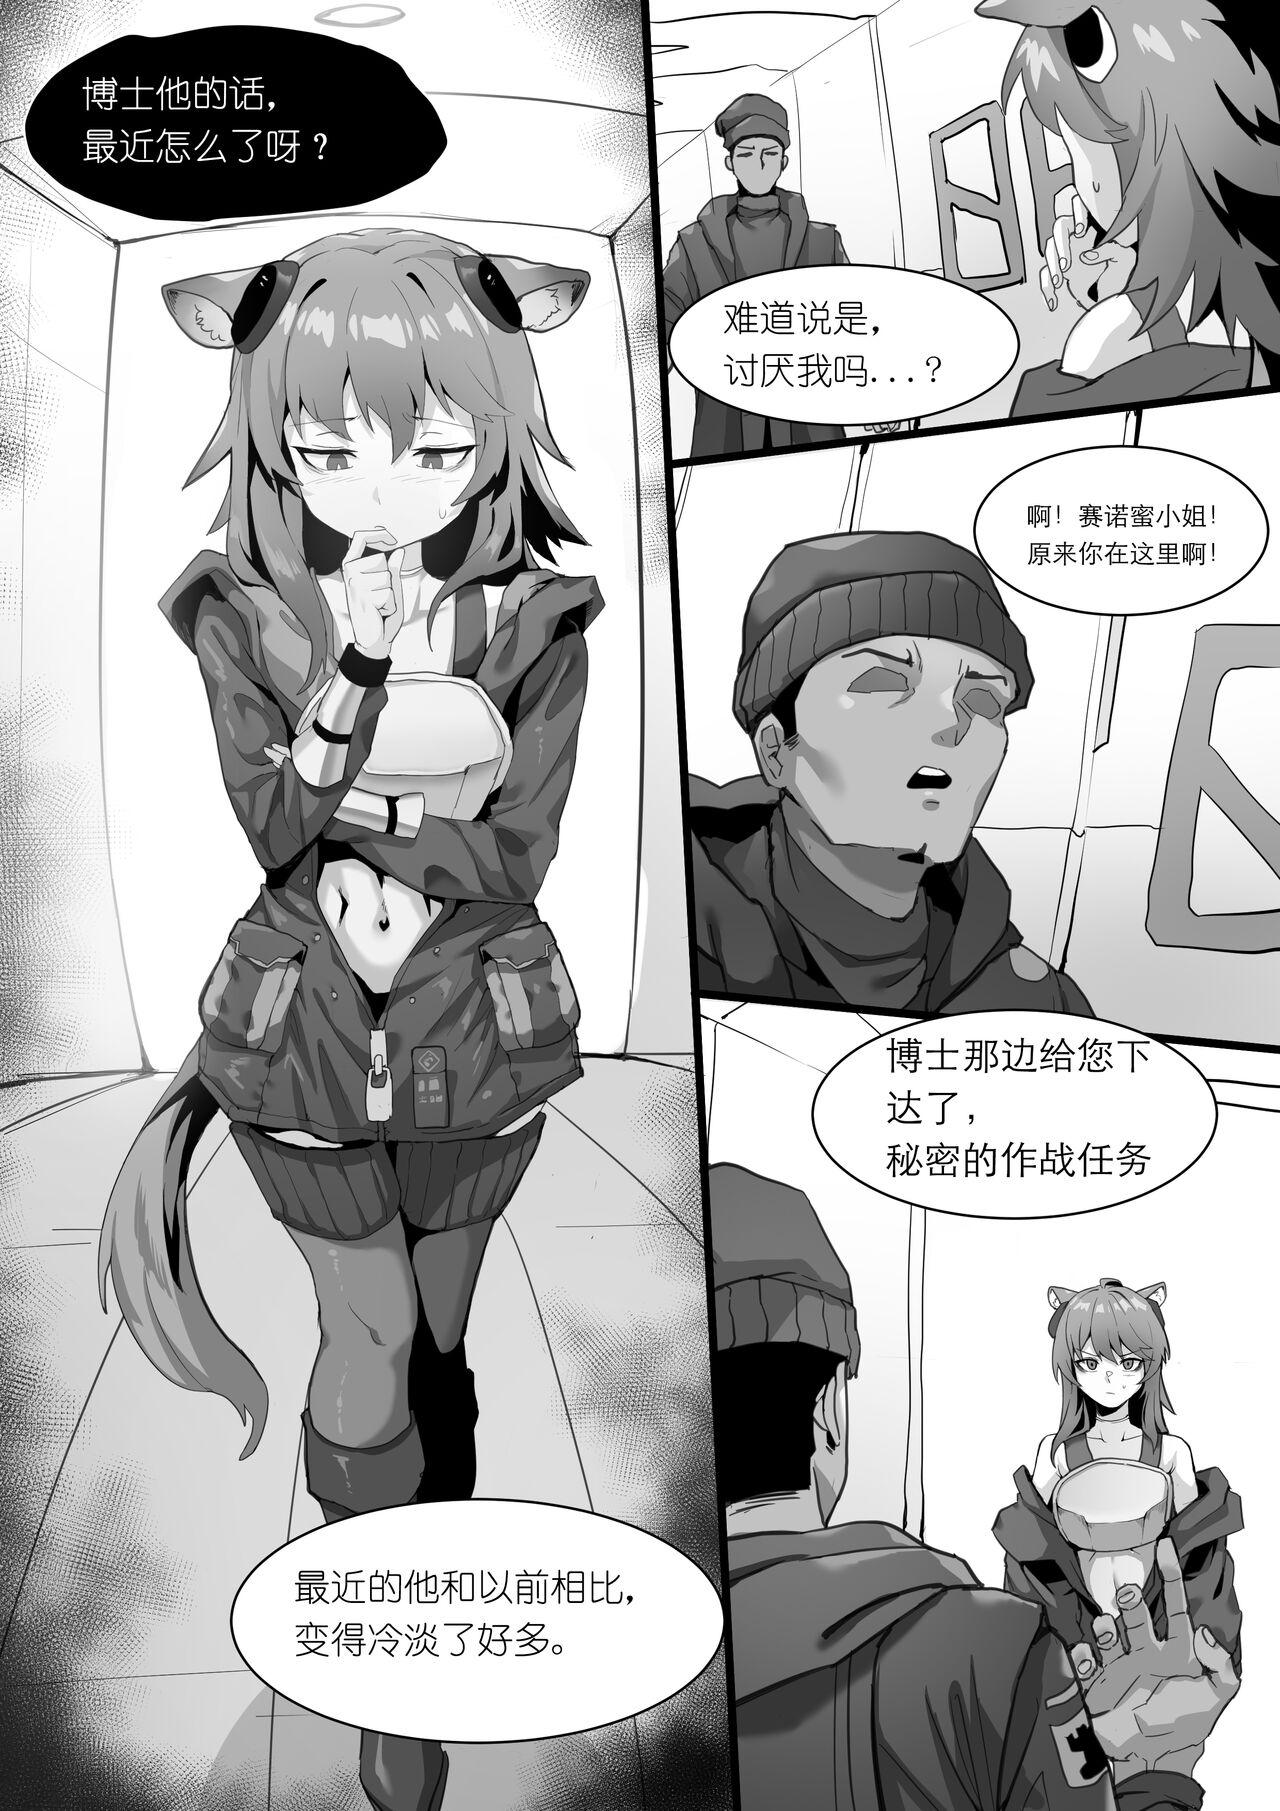 Dicks 欲望方舟记录3 - Arknights Tanned - Page 6